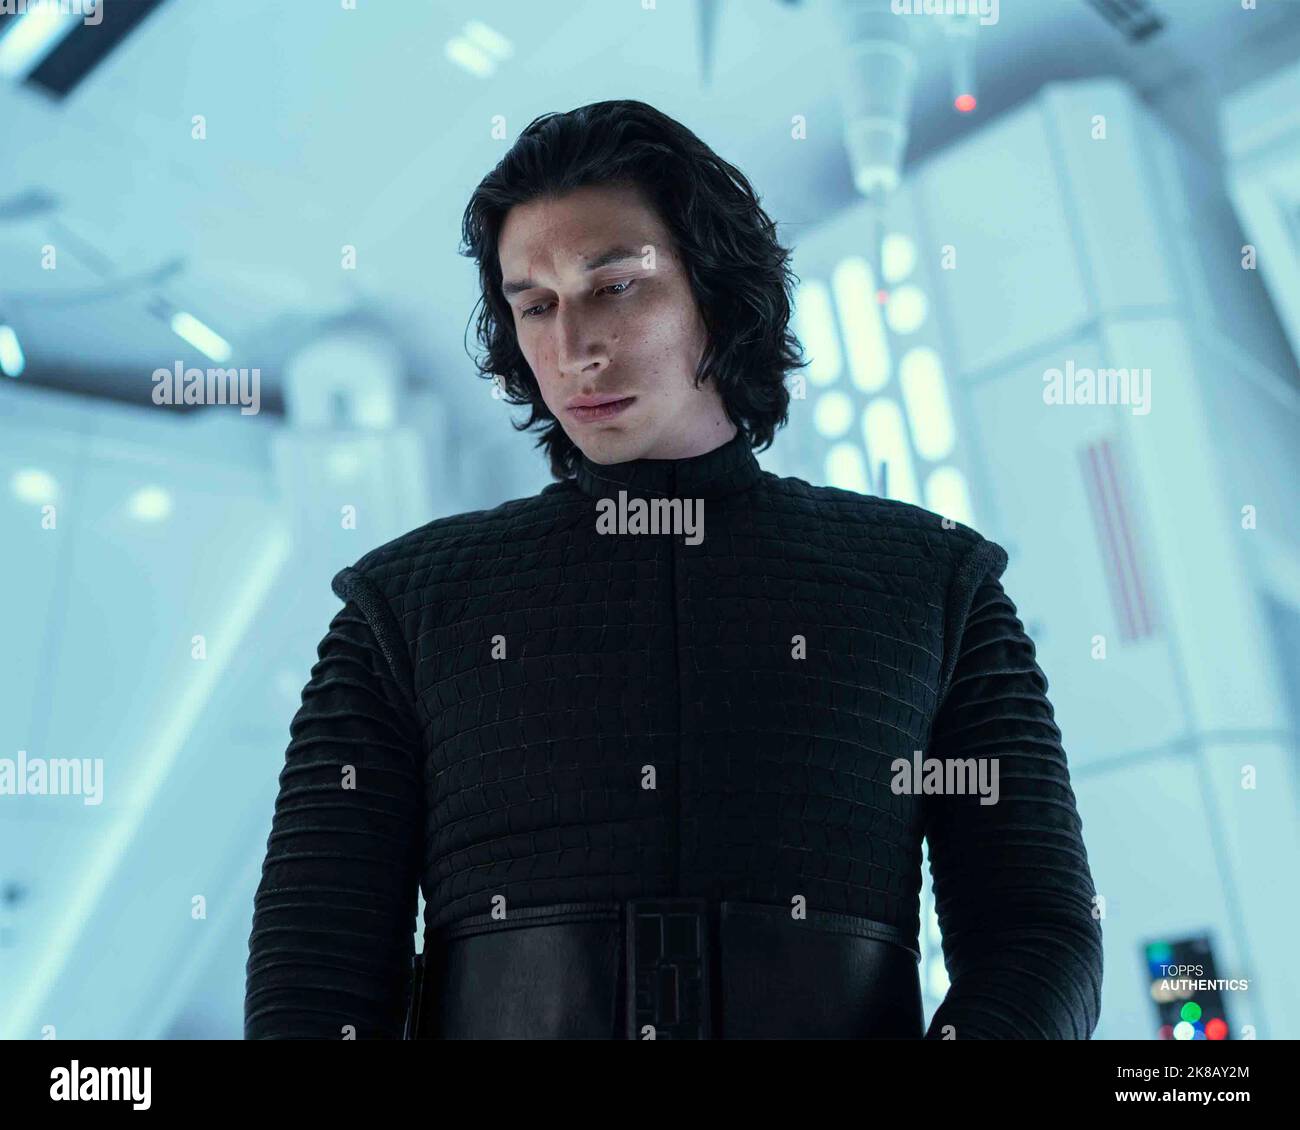 ADAM DRIVER in STAR WARS: THE RISE OF SKYWALKER (2019), directed by J.J ABRAMS. Credit: Lucasfilm/Walt Disney Productions / Album Stock Photo